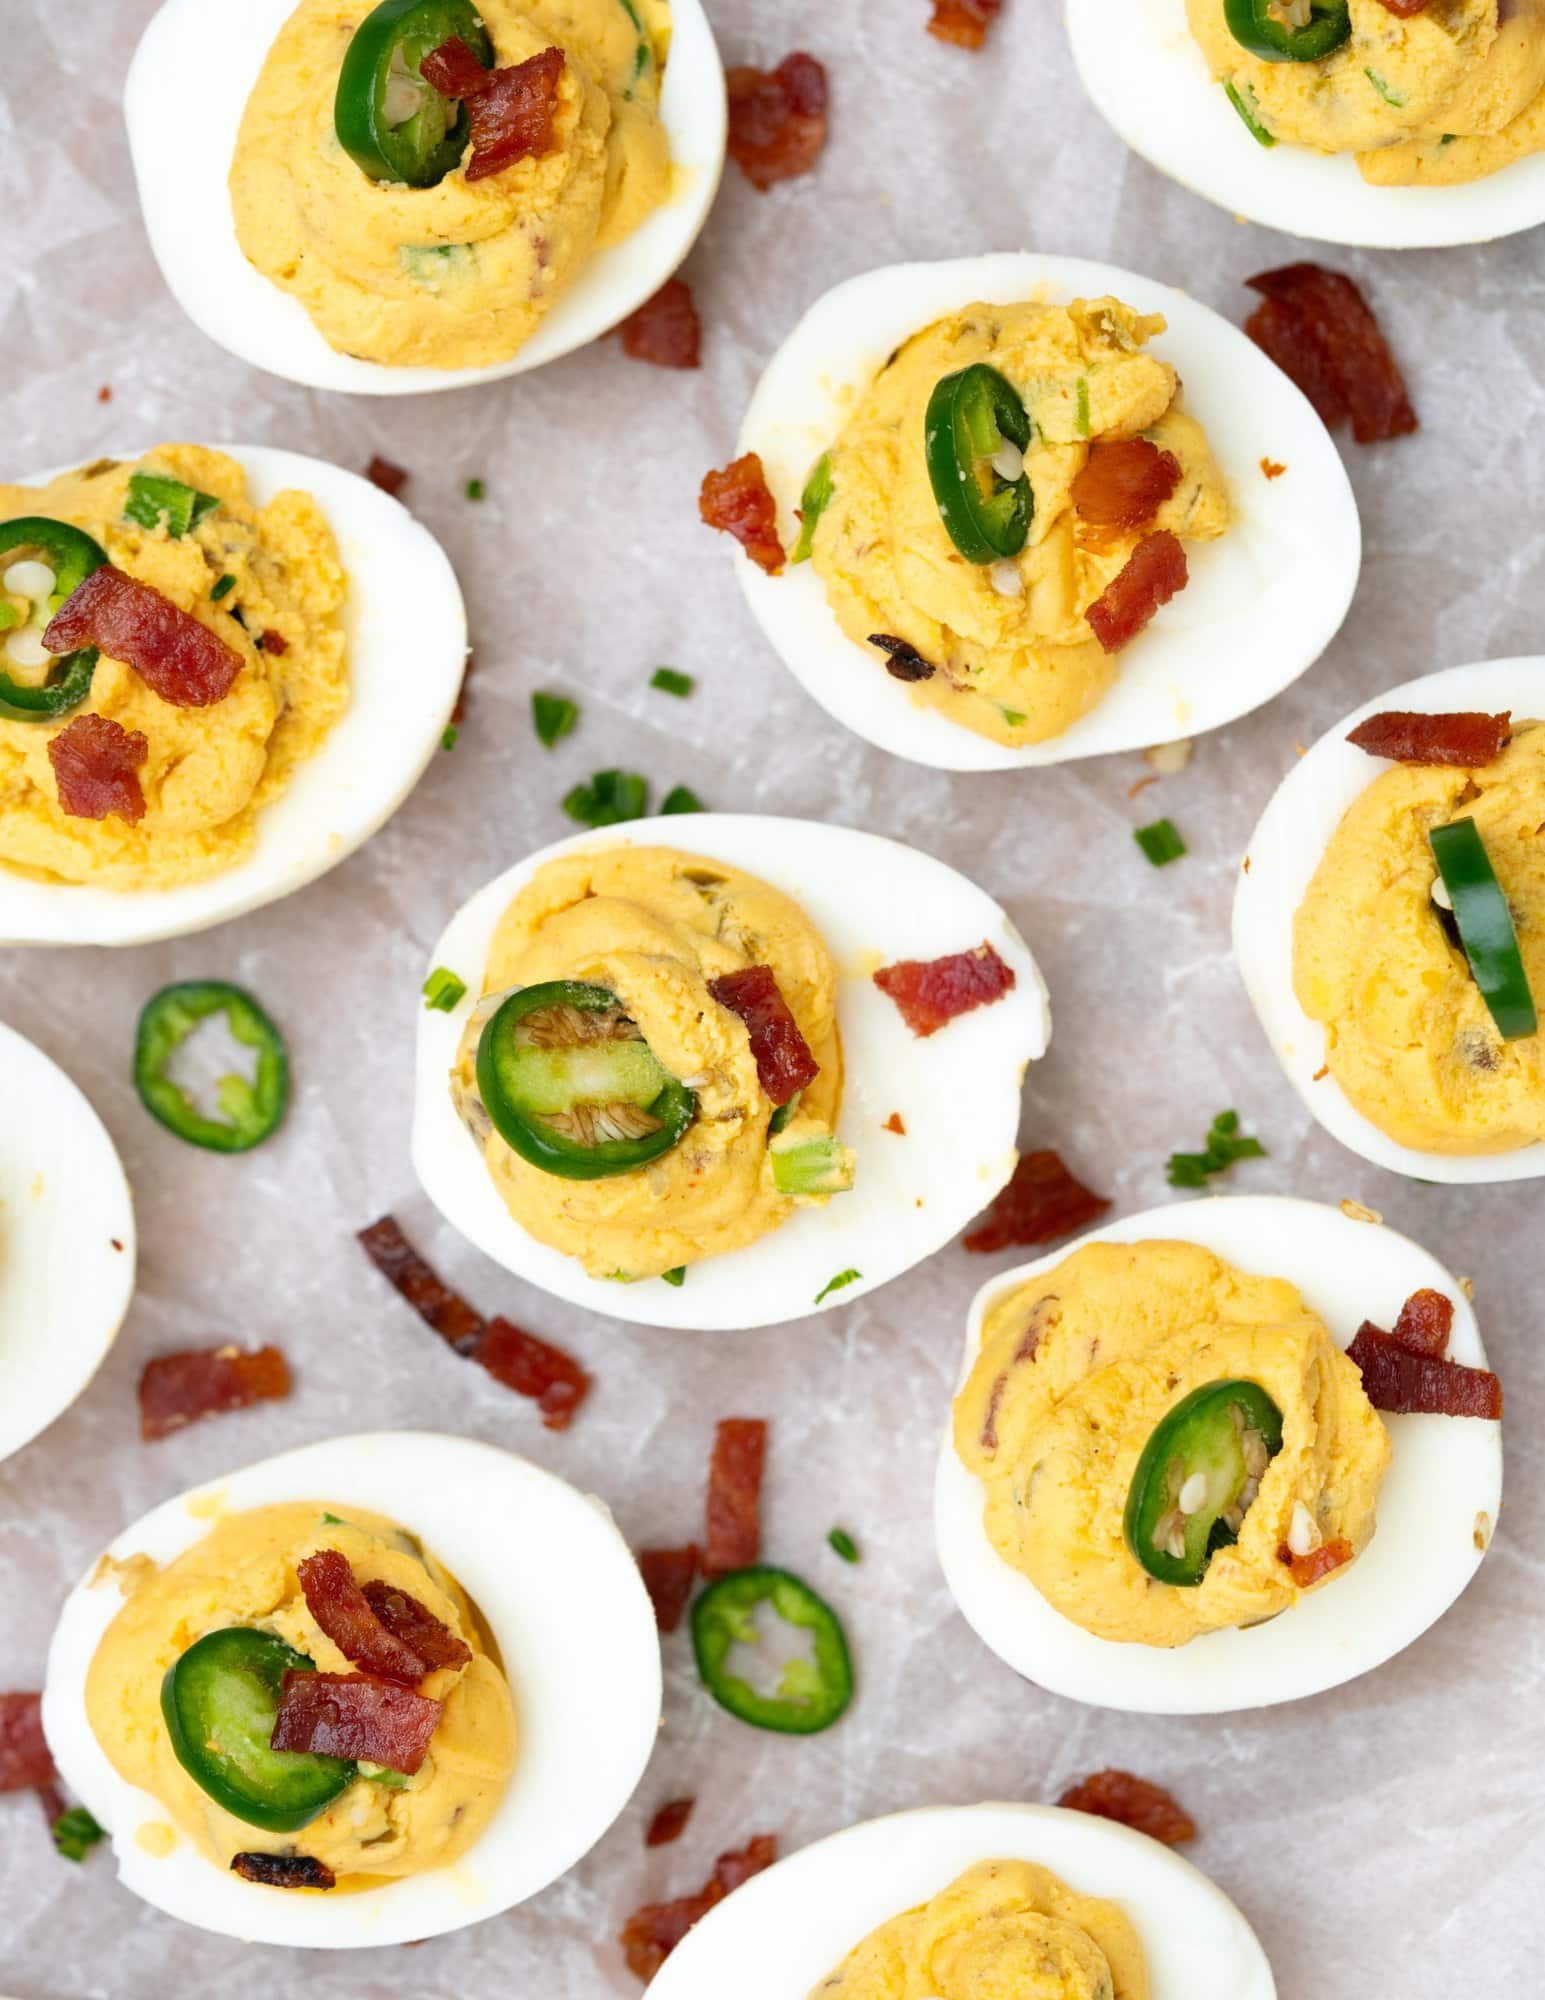 Many Deviled eggs presented with a creamy and soft yolk stuffing filled in and garnished with jalapeno slices and bacon bits.